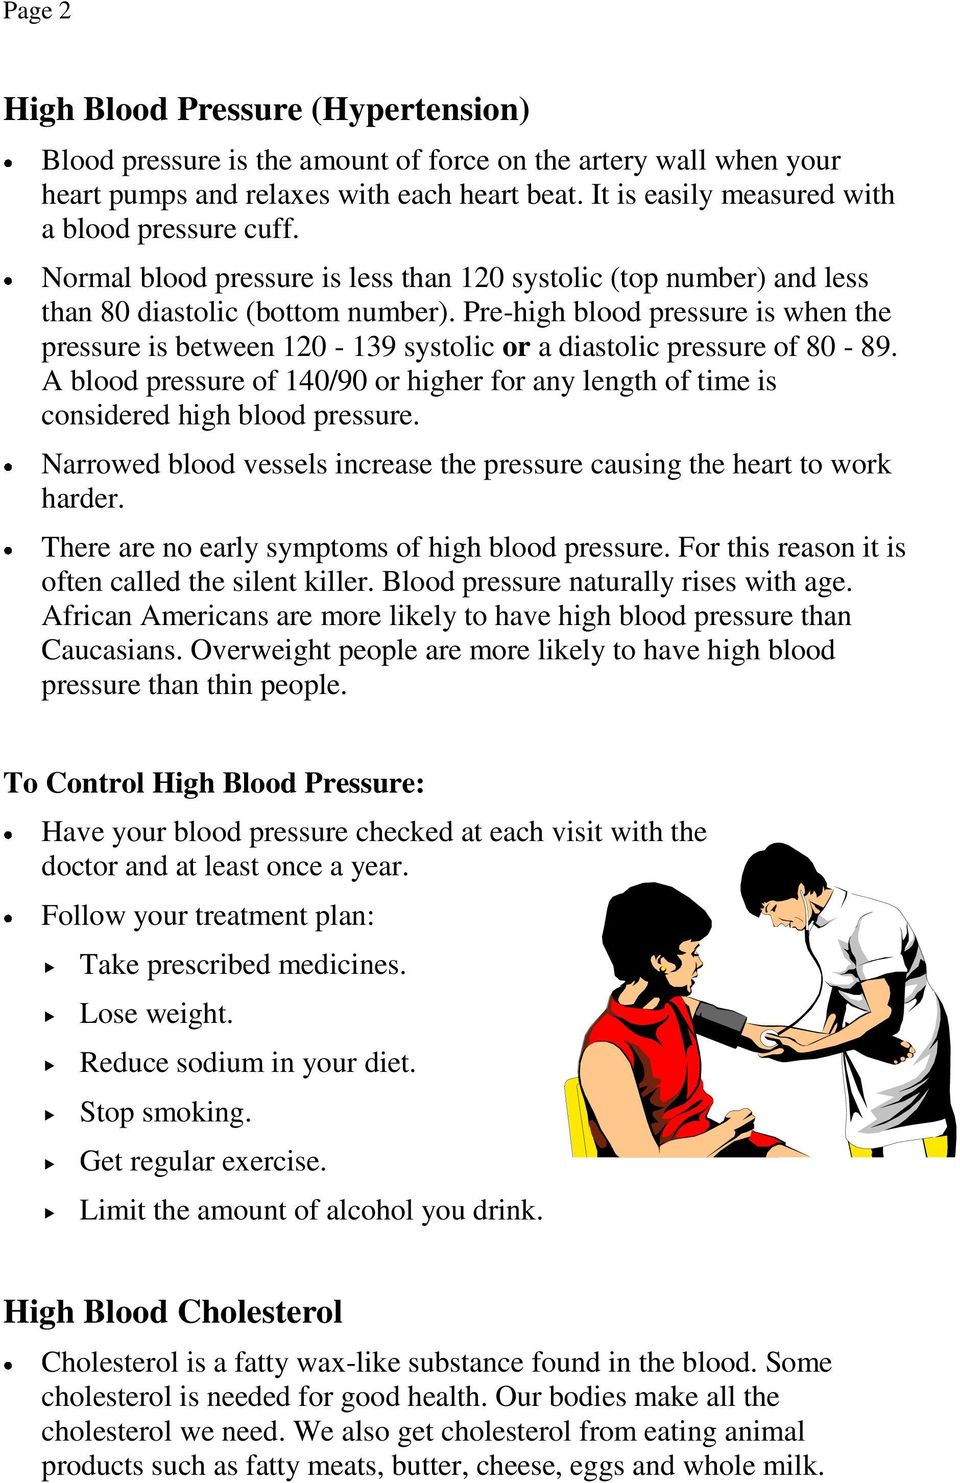 Pre-high blood pressure is when the pressure is between 120-139 systolic or a diastolic pressure of 80-89.